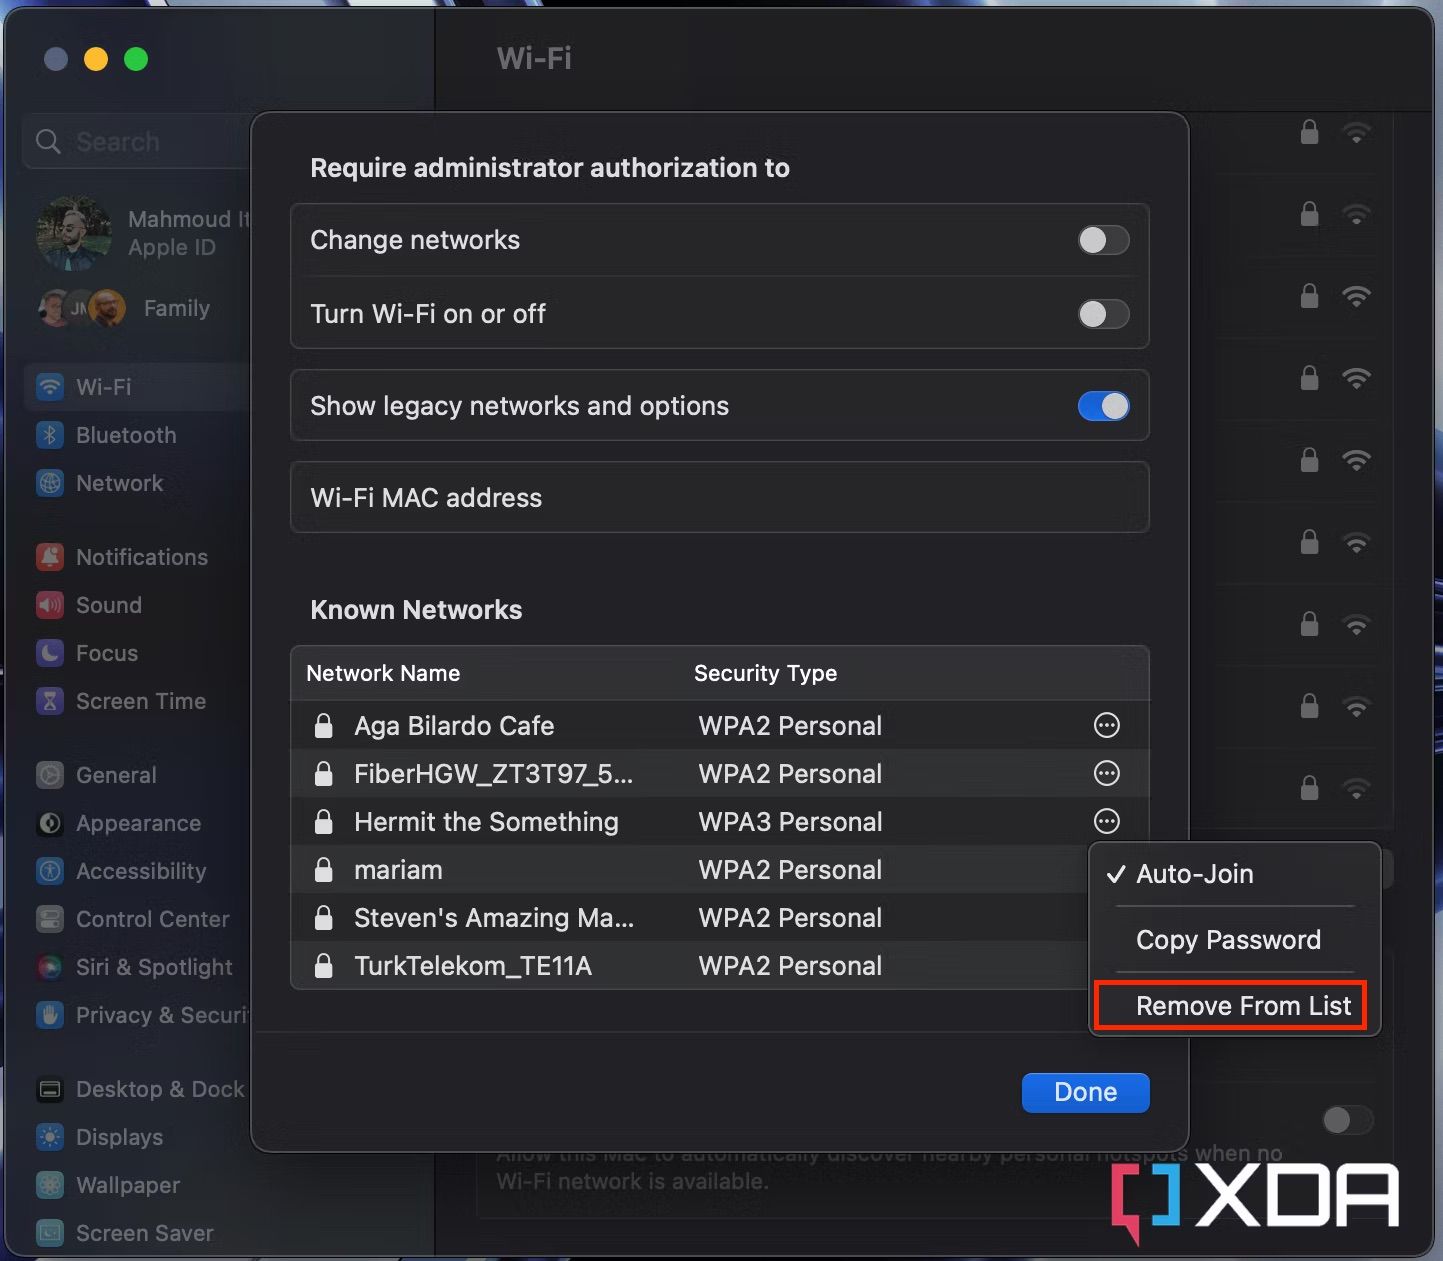 remove from list button in advanced wifi settings on macOS